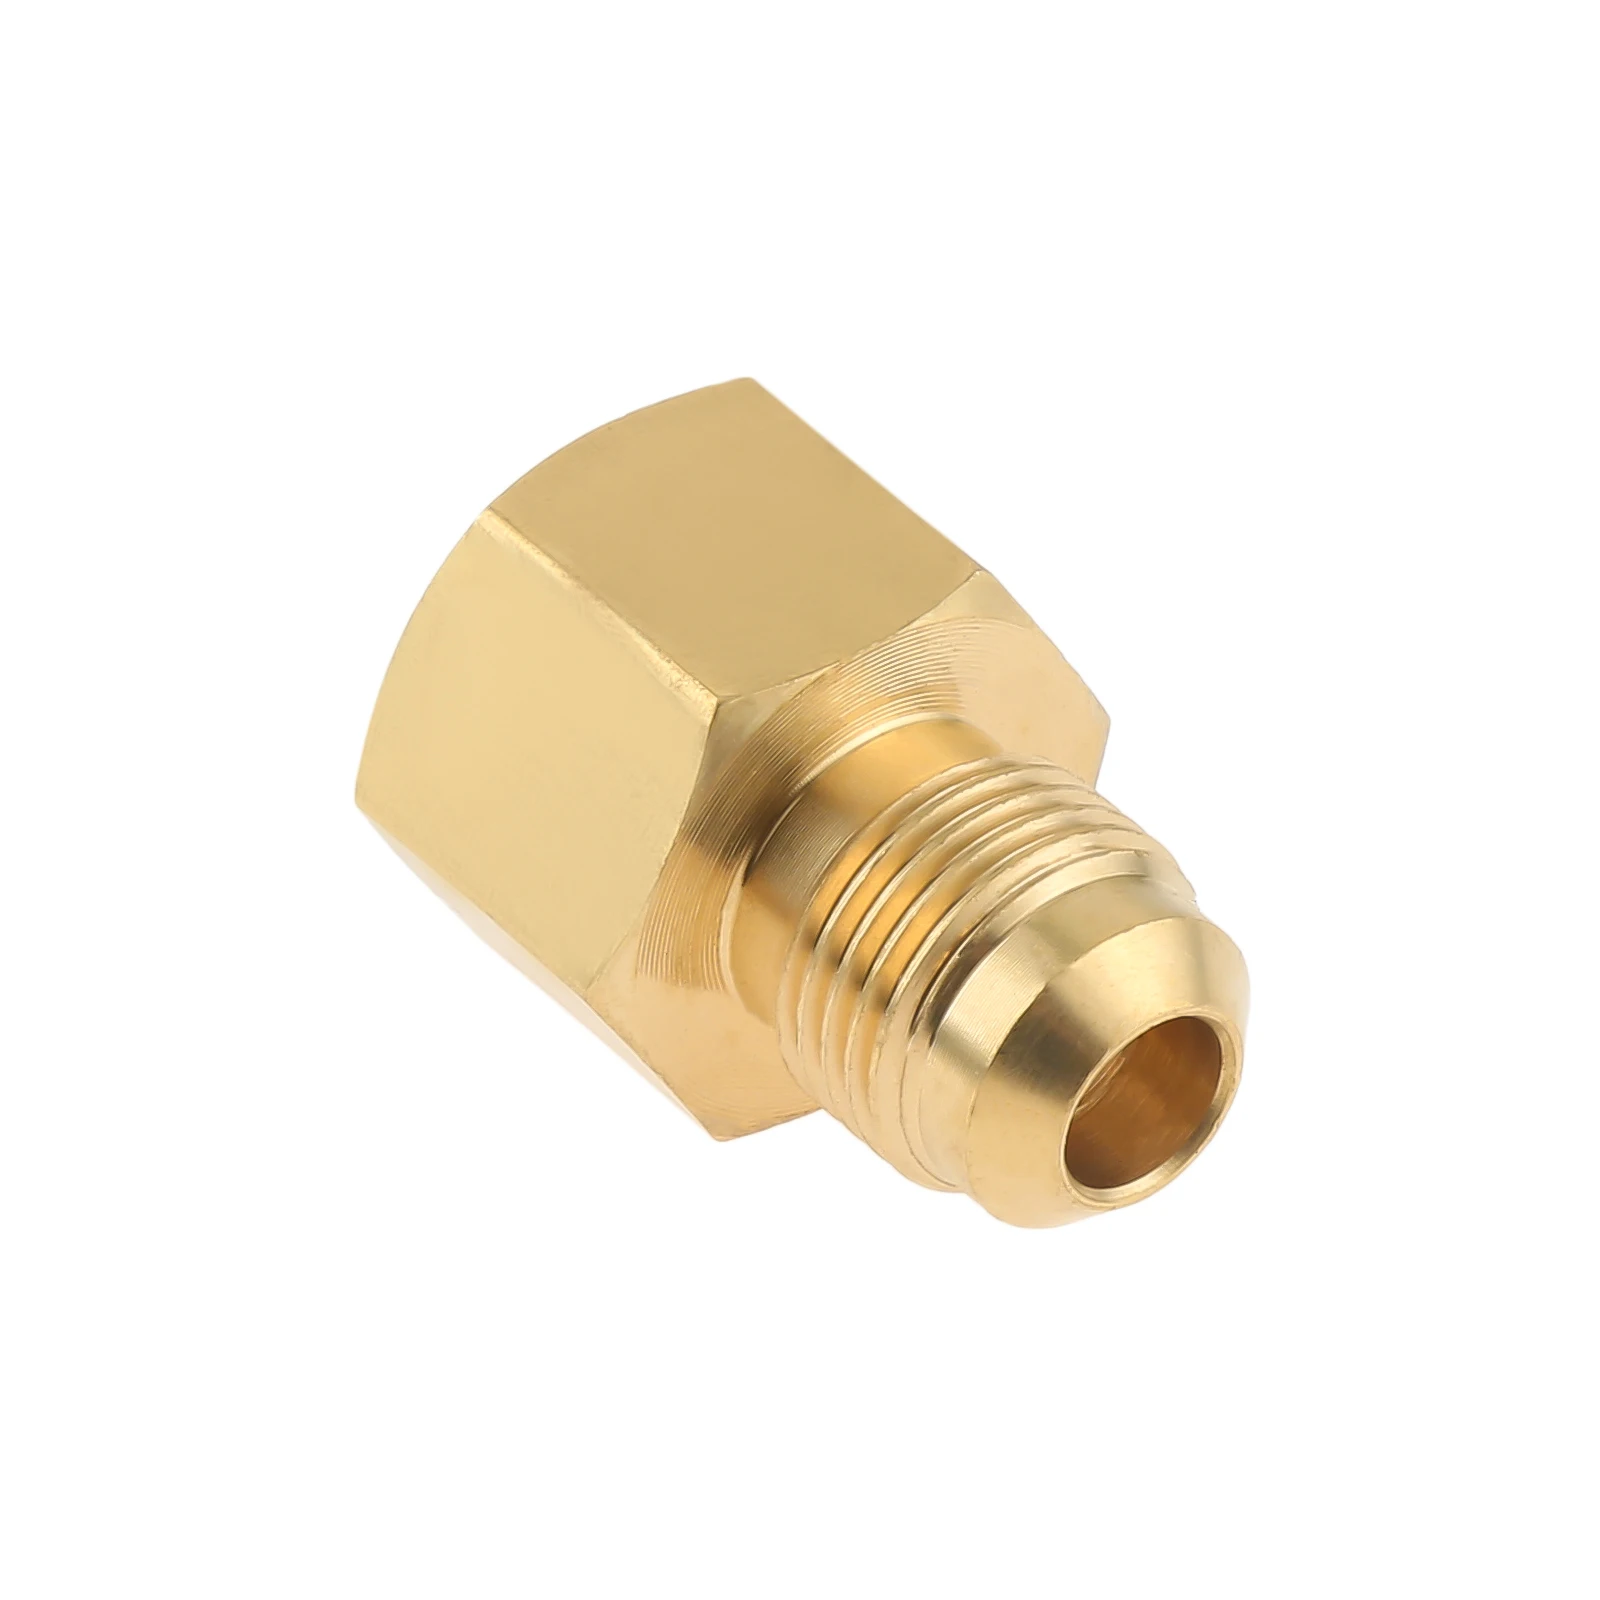 

1Pc Brass Tube Adapter,3/8" Male Flare X 1/2" Female NPT Pipe Coupling Fittings for Outdoor Gas Fire Pits,Propane or Natural Gas